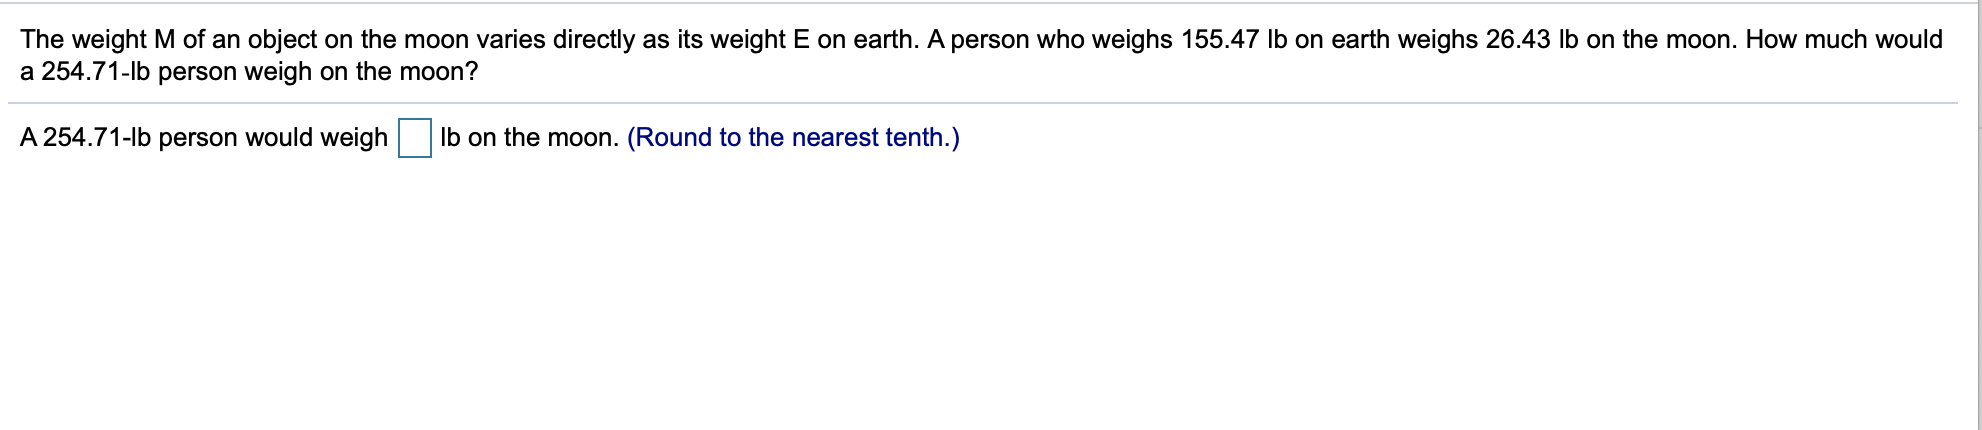 The weight M of an object on the moon varies directly as its weight E on earth. A person who weighs 155.47 lb on earth weighs 26.43 Ib on the moon. How much would
a 254.71-lb person weigh on the moon?
A 254.71-lb person would weigh Ib on the moon. (Round to the nearest tenth.)
